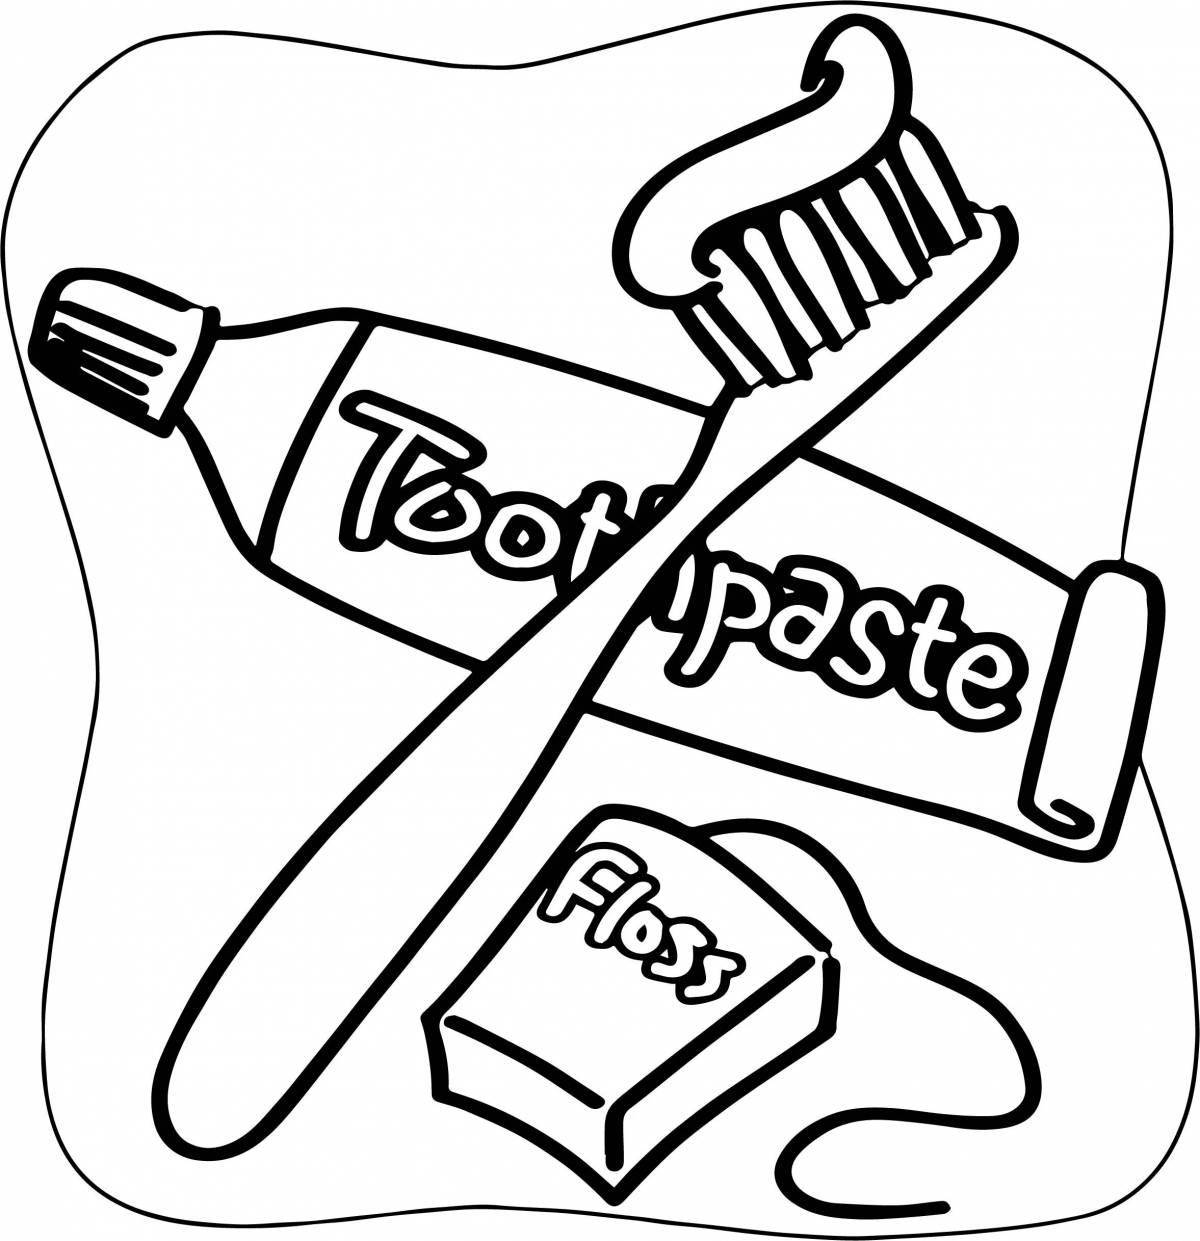 Shimmering coloring page toothpaste for little ones